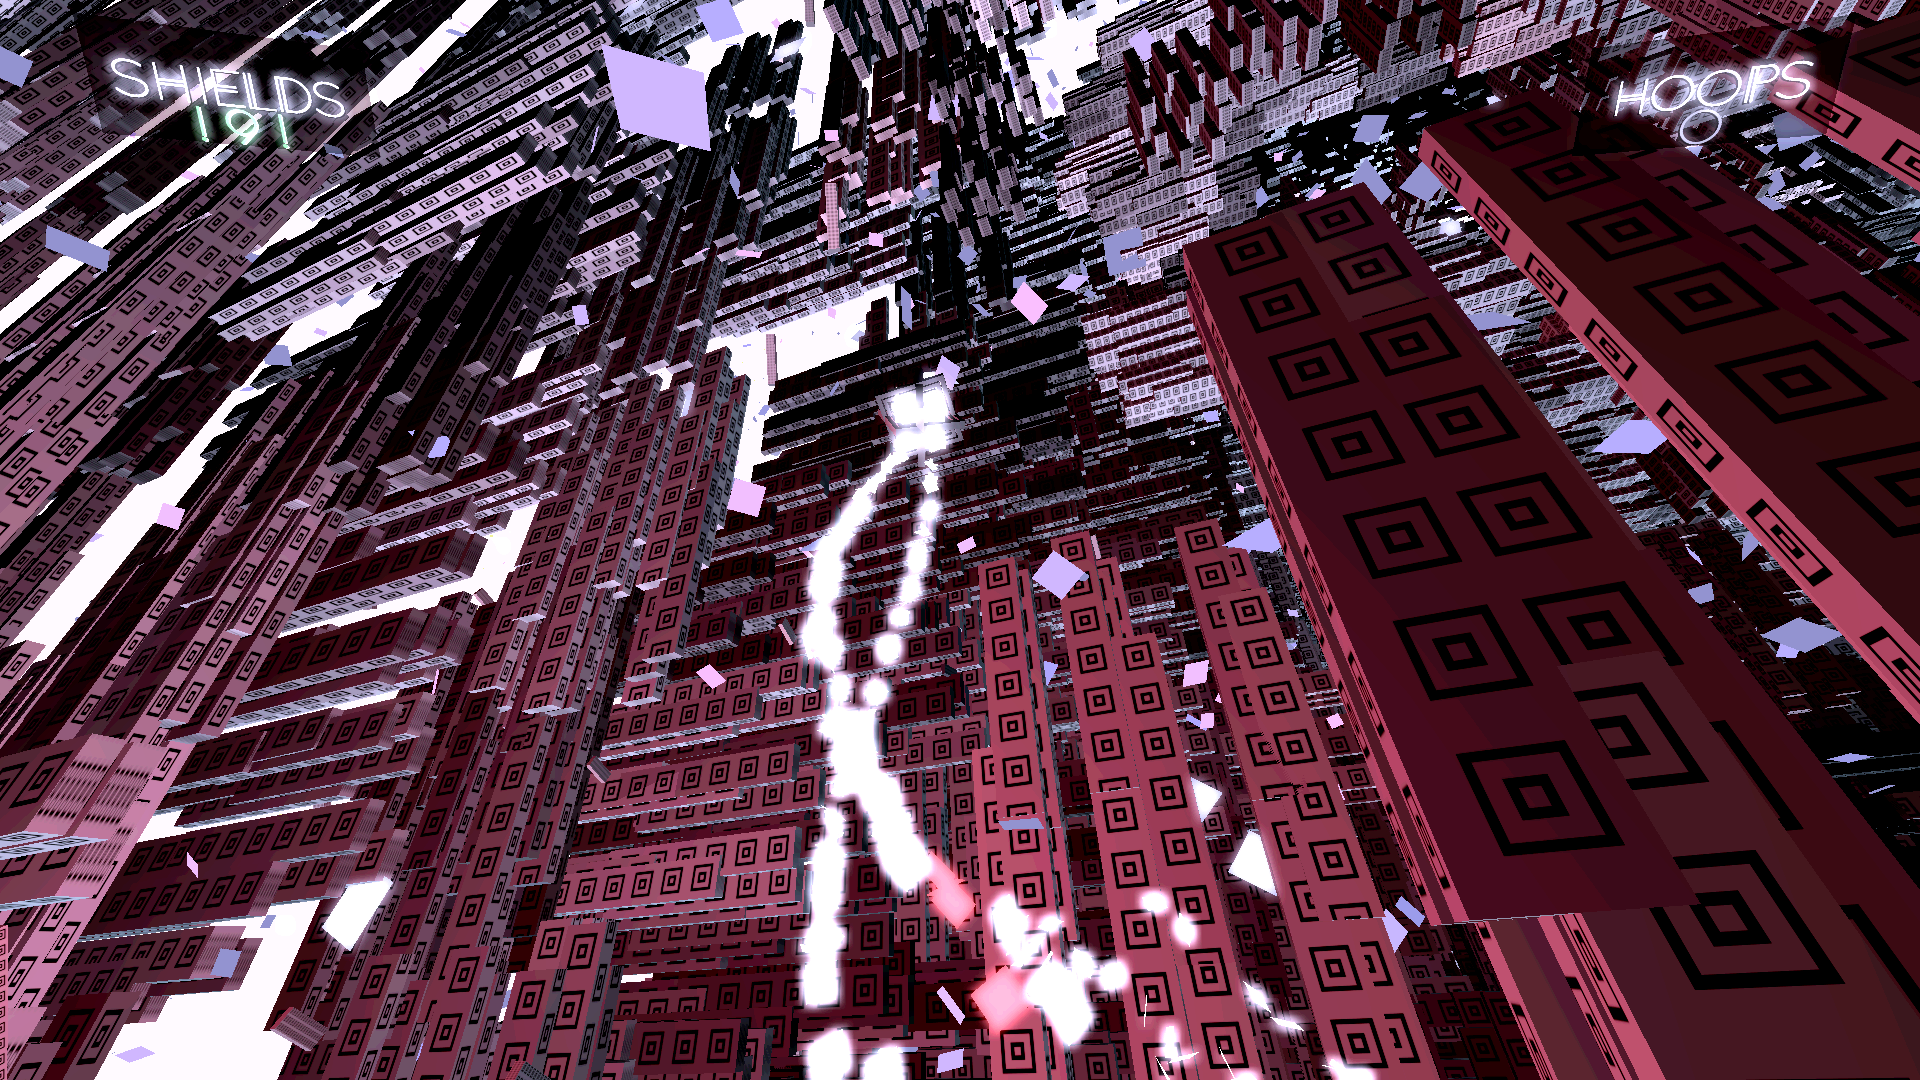 A screenshot from Endlight with a string of lit-up cubes falling down the side of what looks like a cityscape.